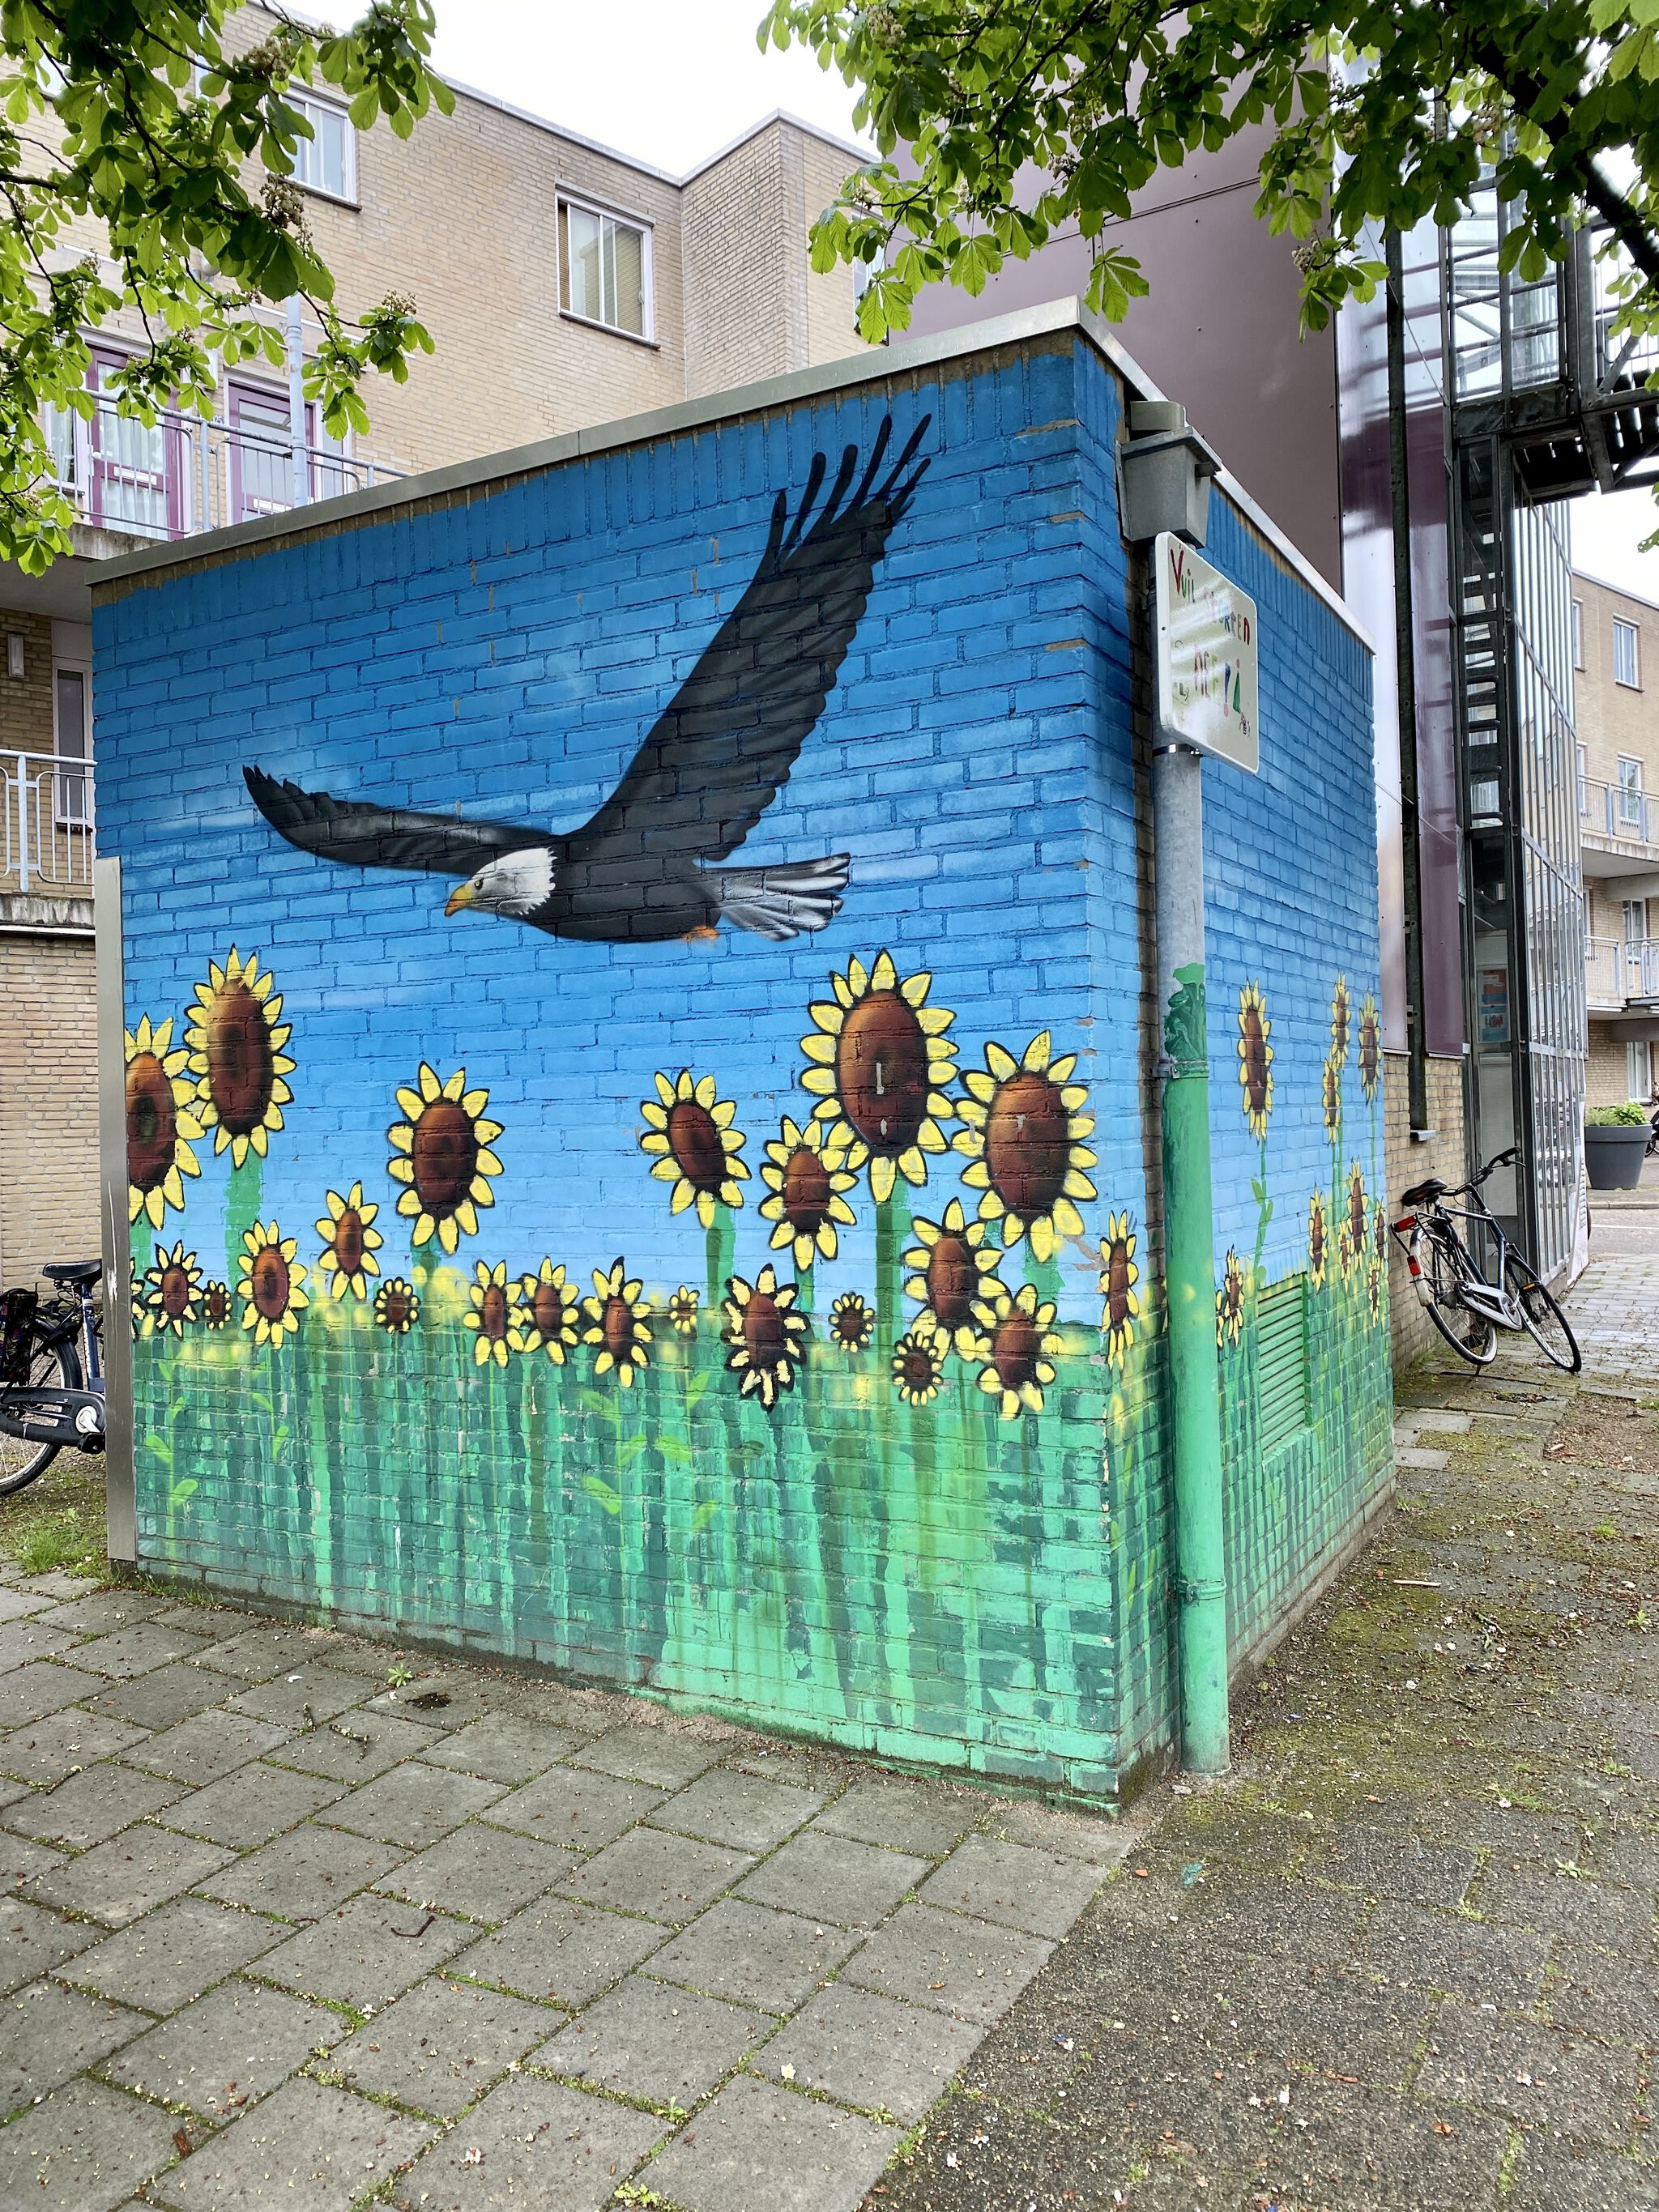 Unknown - Amersfoort&mdash;The eagle and sunflowers